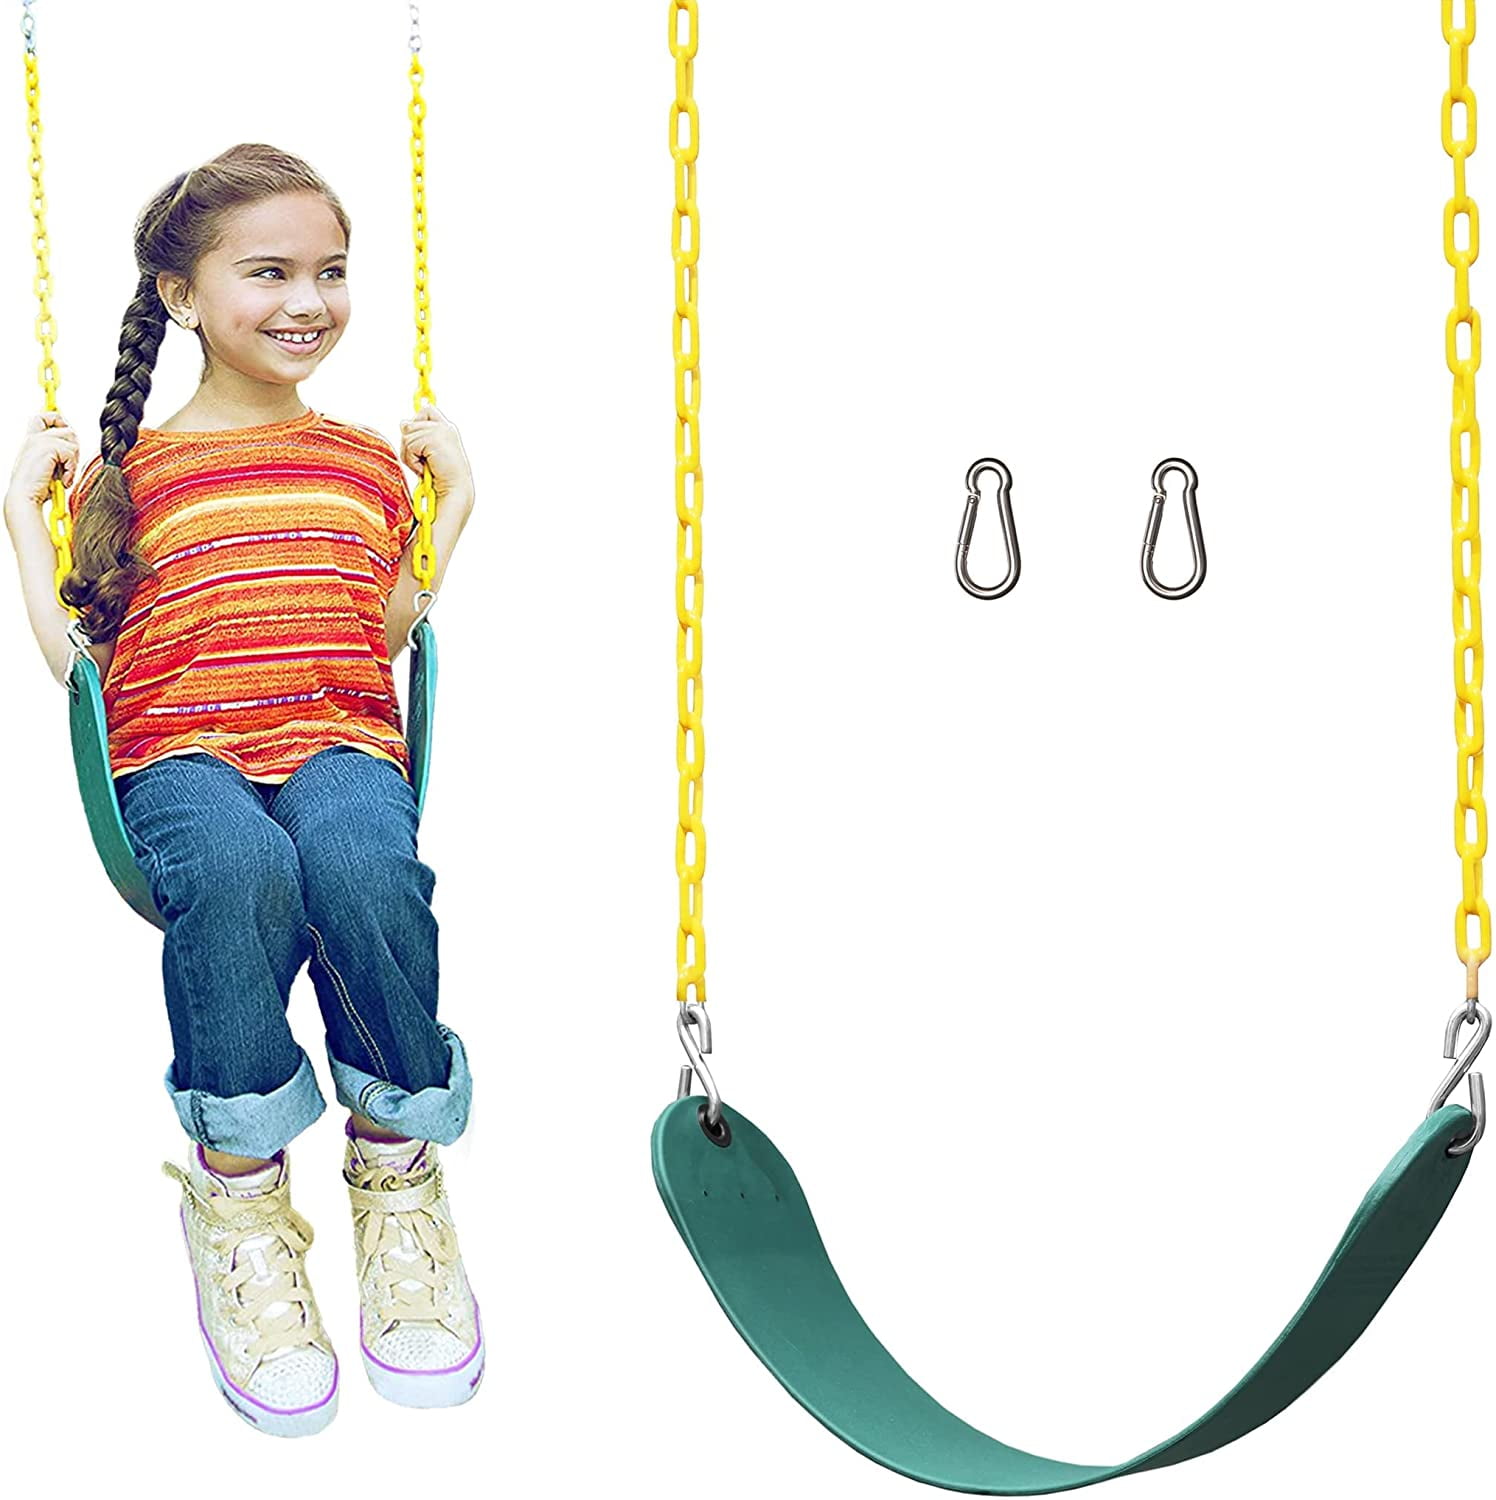 Heavy Duty Swing Seat Swing Set Accessories with Coated Chain Replacement Adult 